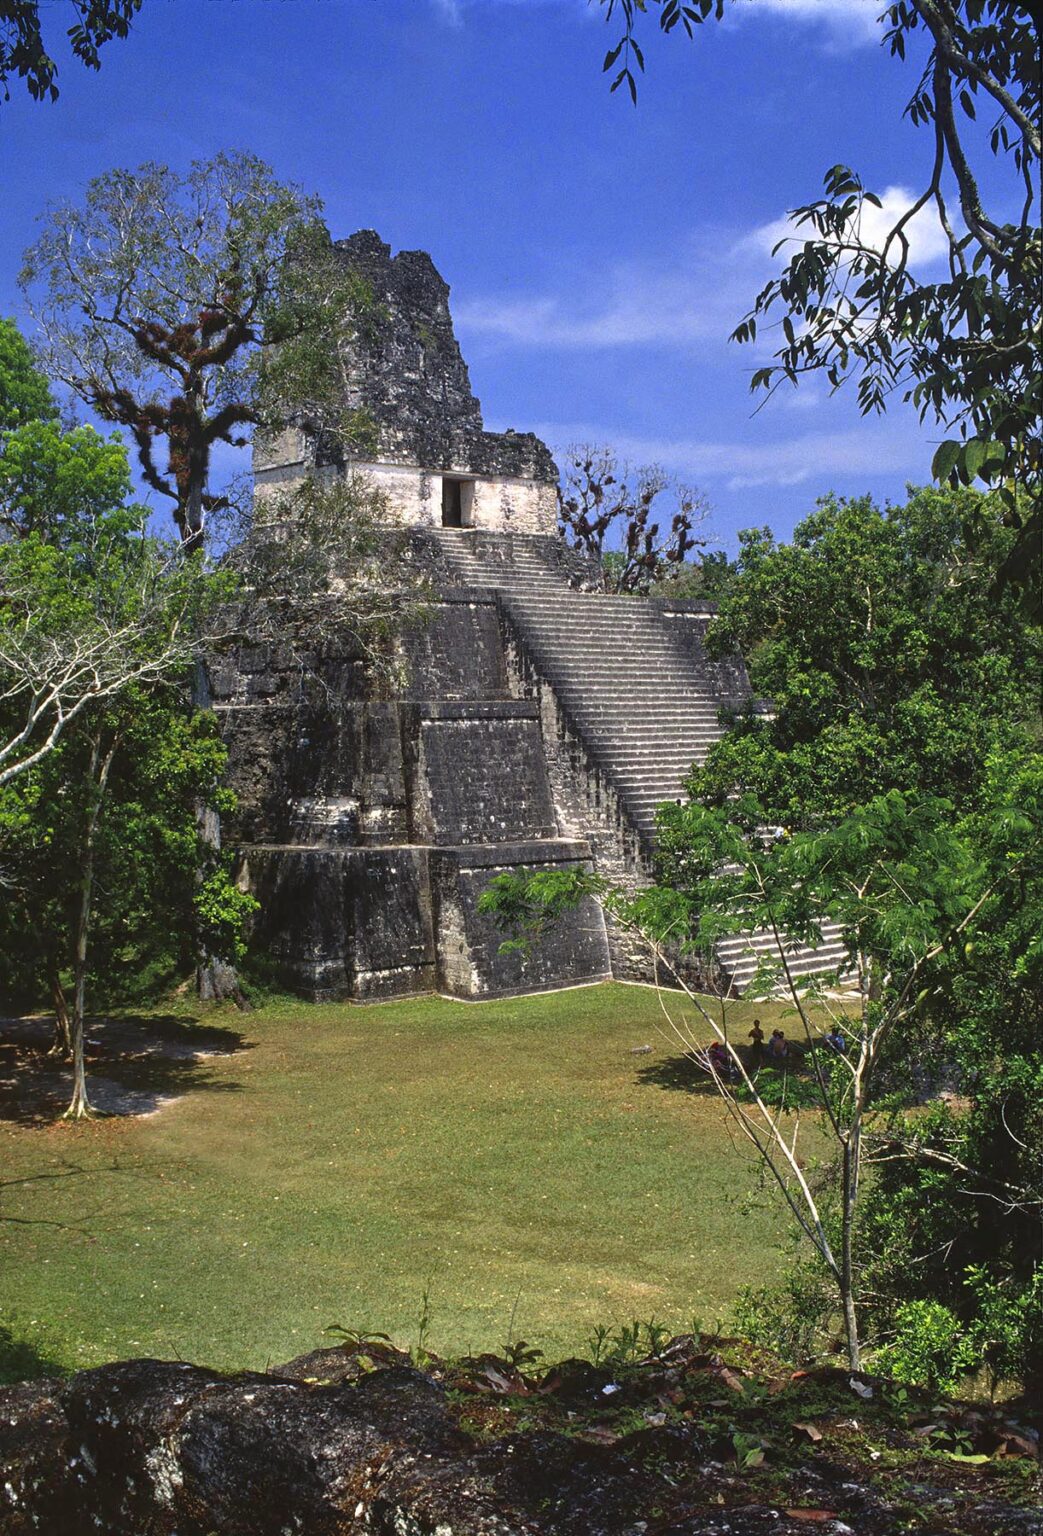 TEMPLE II, 125 ft. tall & dated to 700 AD, an ancient remnant of the great MAYA civilization - TIKAL, GUATEMALA